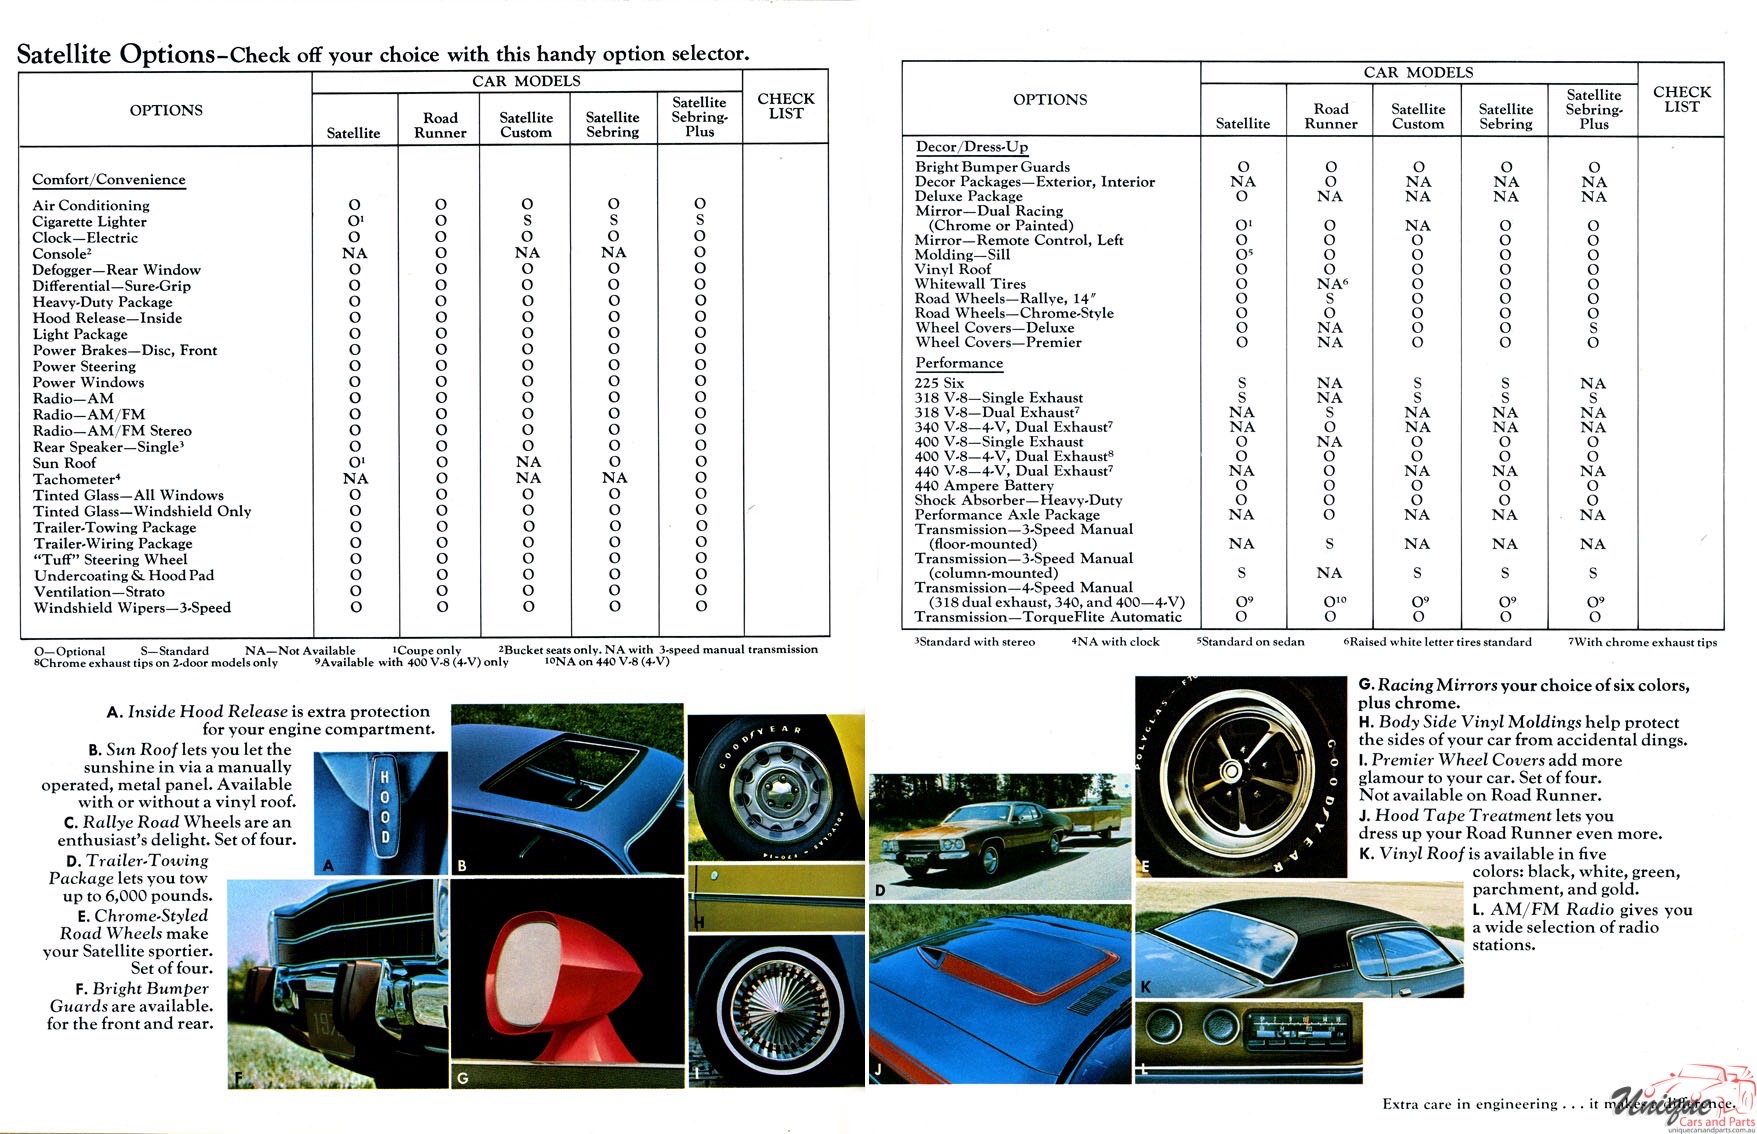 1973 Plymouth Satellite Brochure Page 9